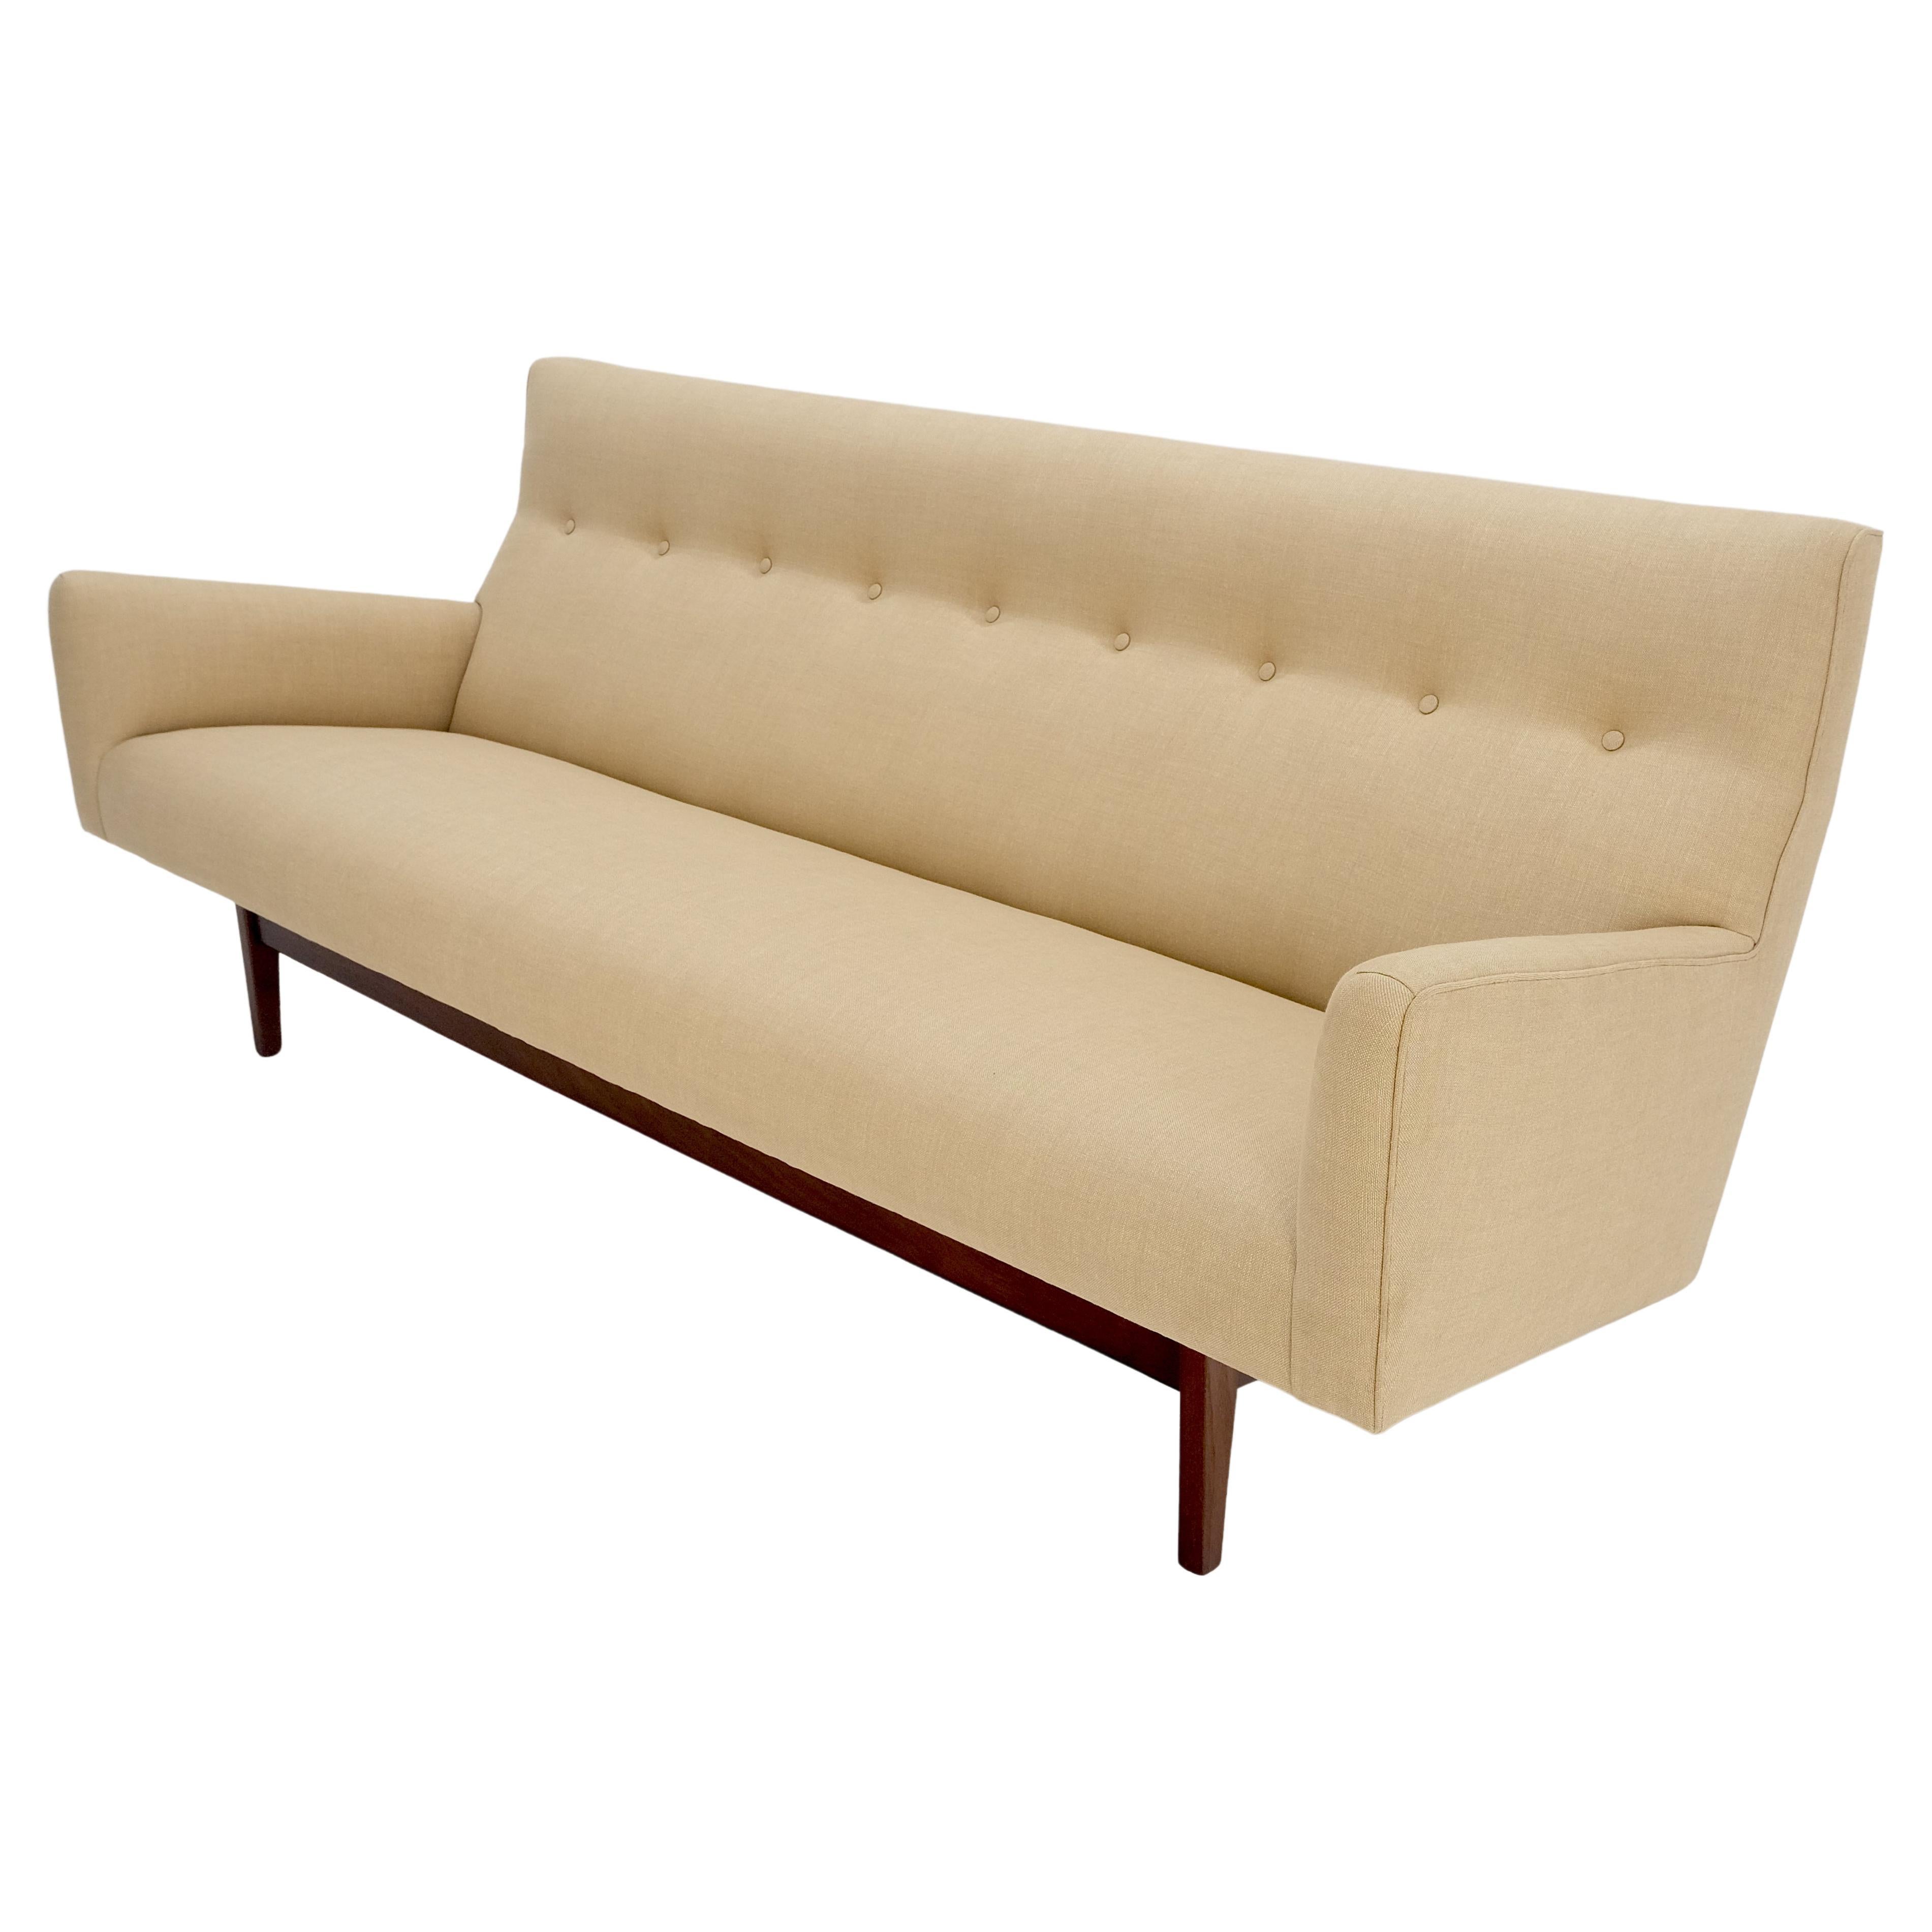 Mid-Century Modern Jens Risom NEW Beige Linen Upholstery Oiled Walnut Frame c1960s Sofa Couch MINT! For Sale